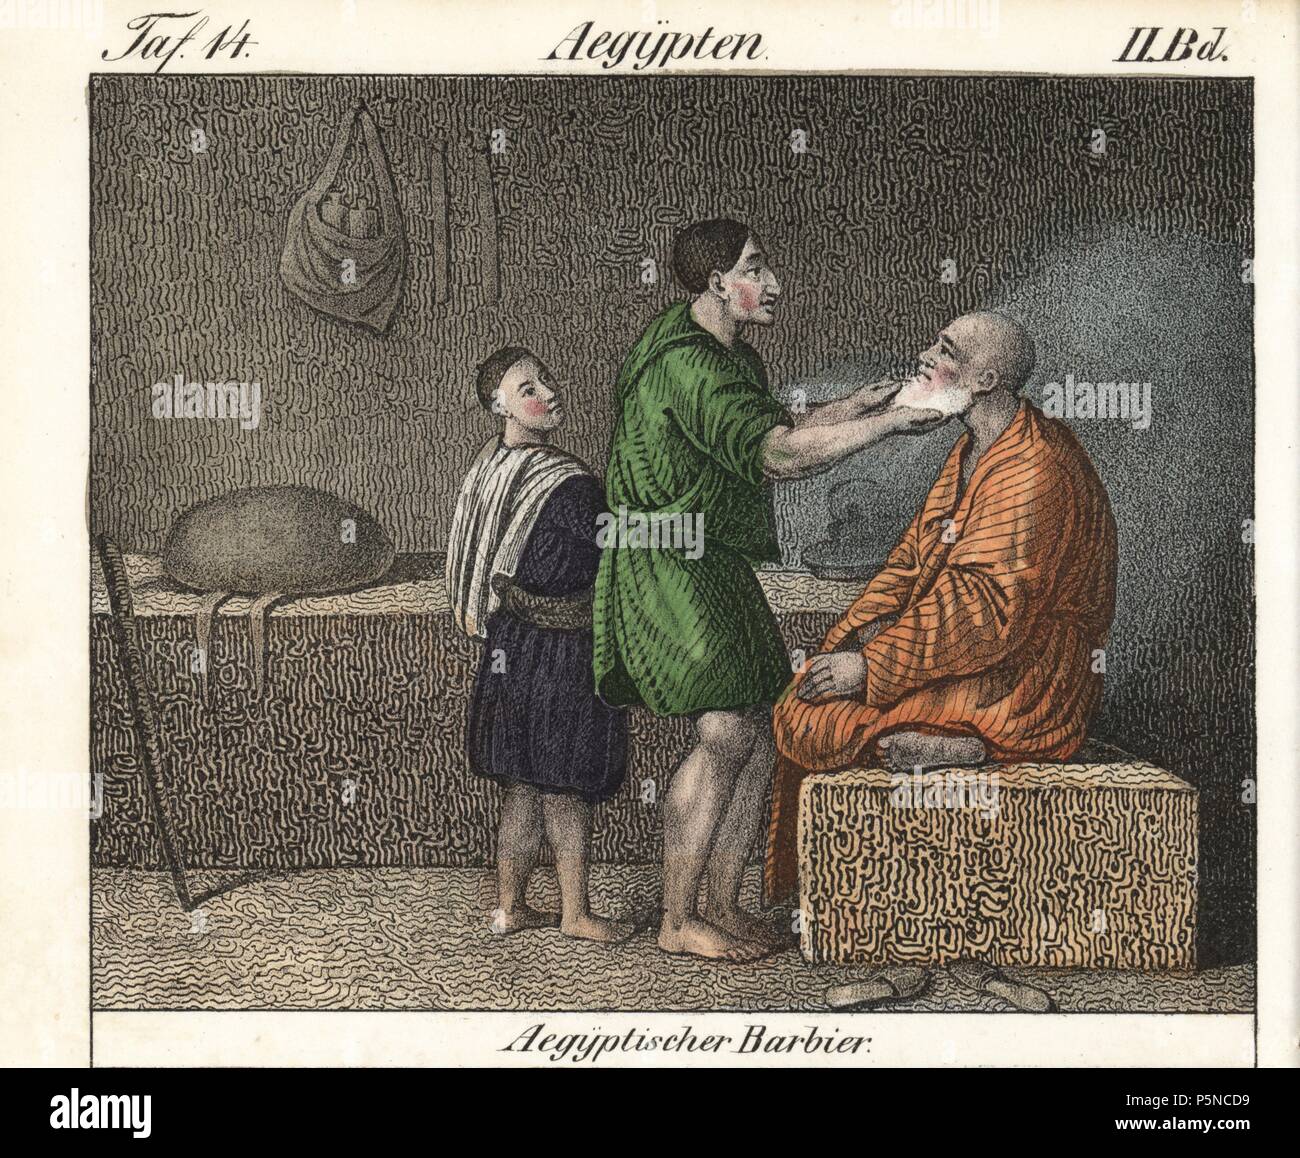 Egyptian barbershop with man seated barefoot on a platform while the barber trims his beard. Handcoloured lithograph from Friedrich Wilhelm Goedsche's 'Vollstaendige Völkergallerie in getreuen Abbildungen' (Complete Gallery of Peoples in True Pictures), Meissen, circa 1835-1840. Goedsche (1785-1863) was a German writer, bookseller and publisher in Meissen. Many of the illustrations were adapted from Bertuch's 'Bilderbuch fur Kinder' and others. Stock Photo